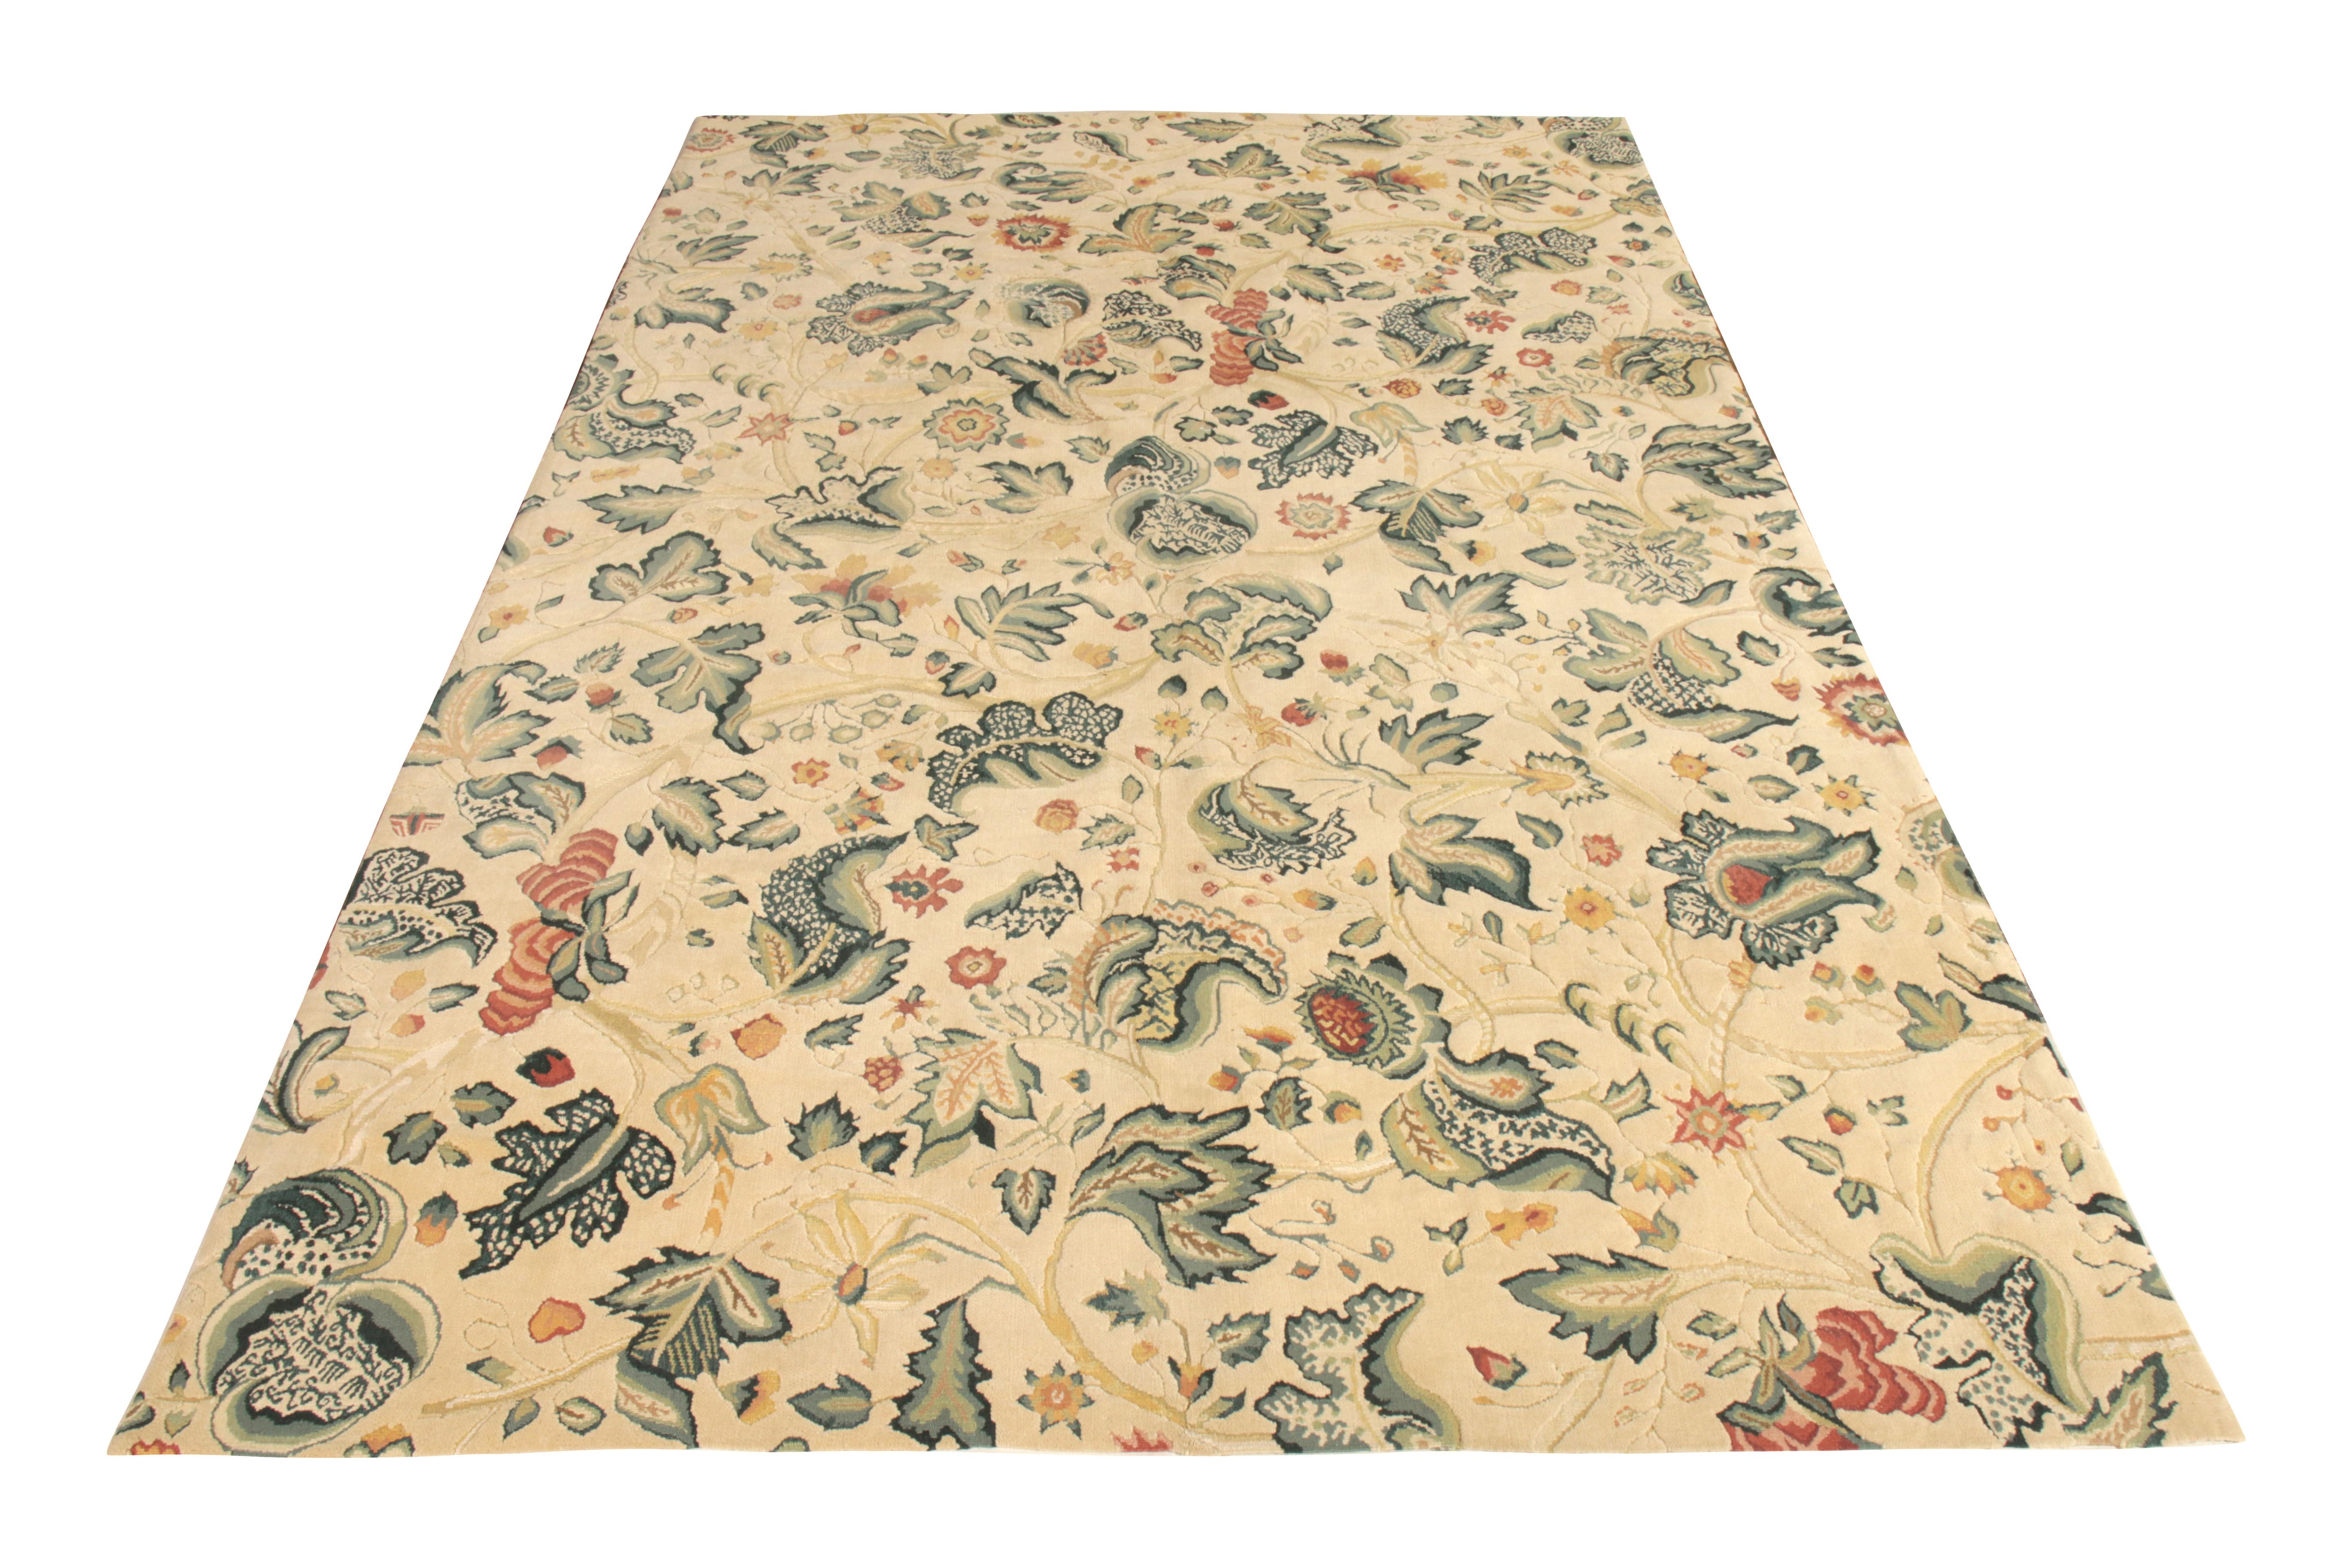 Rug & Kilim welcomes this ostentatious creation to its European Cllection. The rug features a tasteful floral design that blends Tudor rug sensibilities into an enticing 6x10 frame of floral design in blue-green accents— imposed atop a beige-yellow